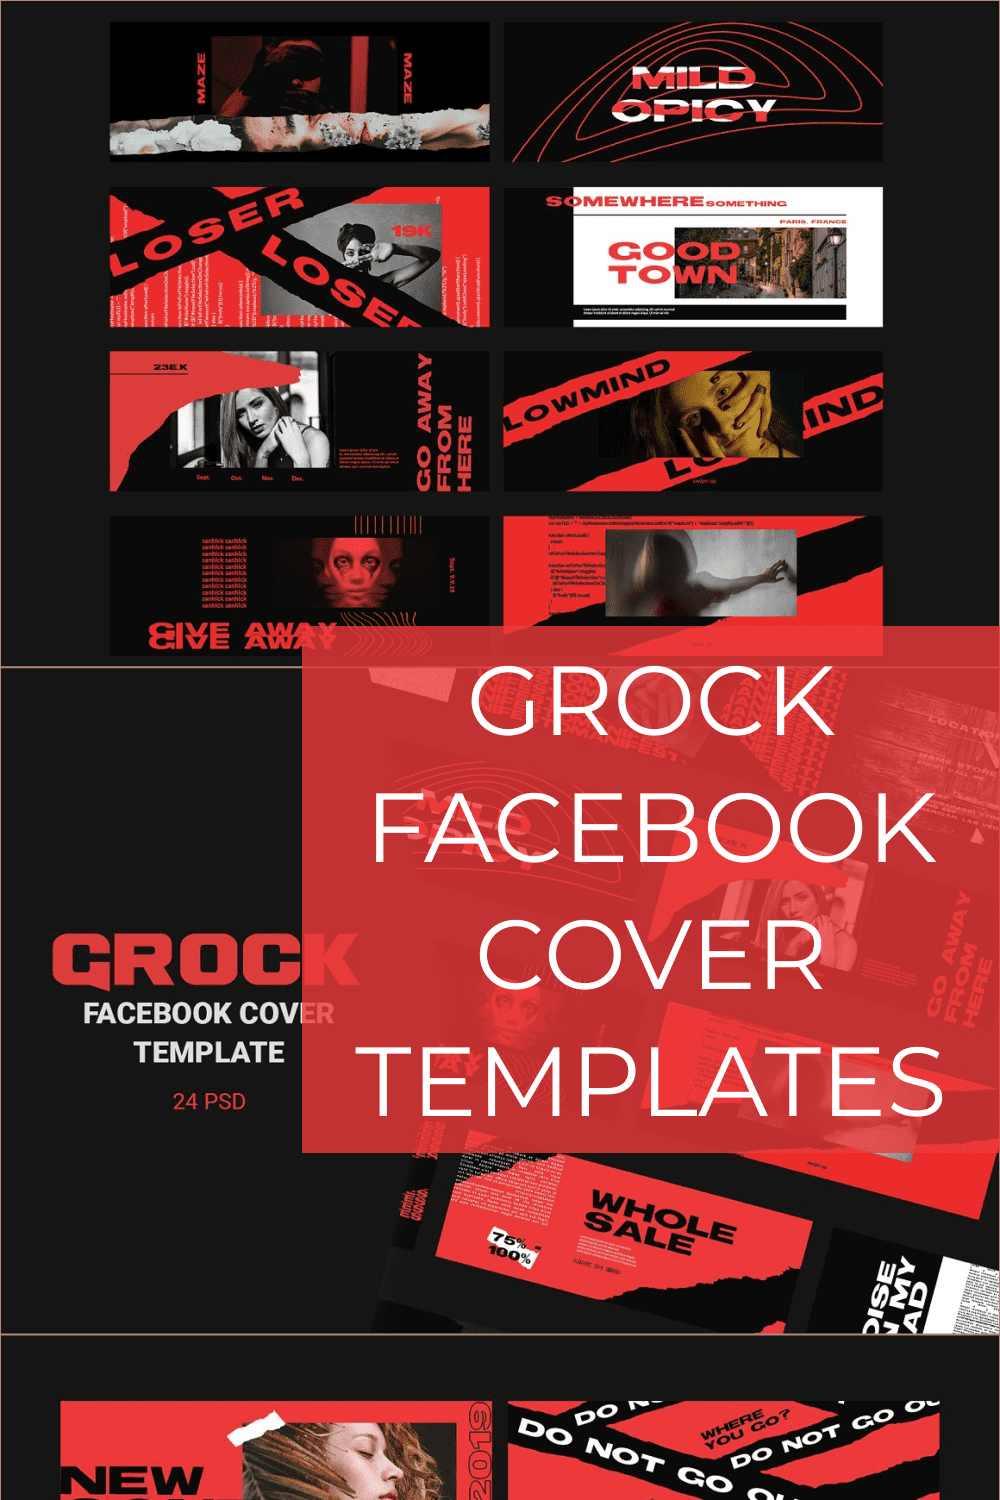 Black and red templates for your Facebook.